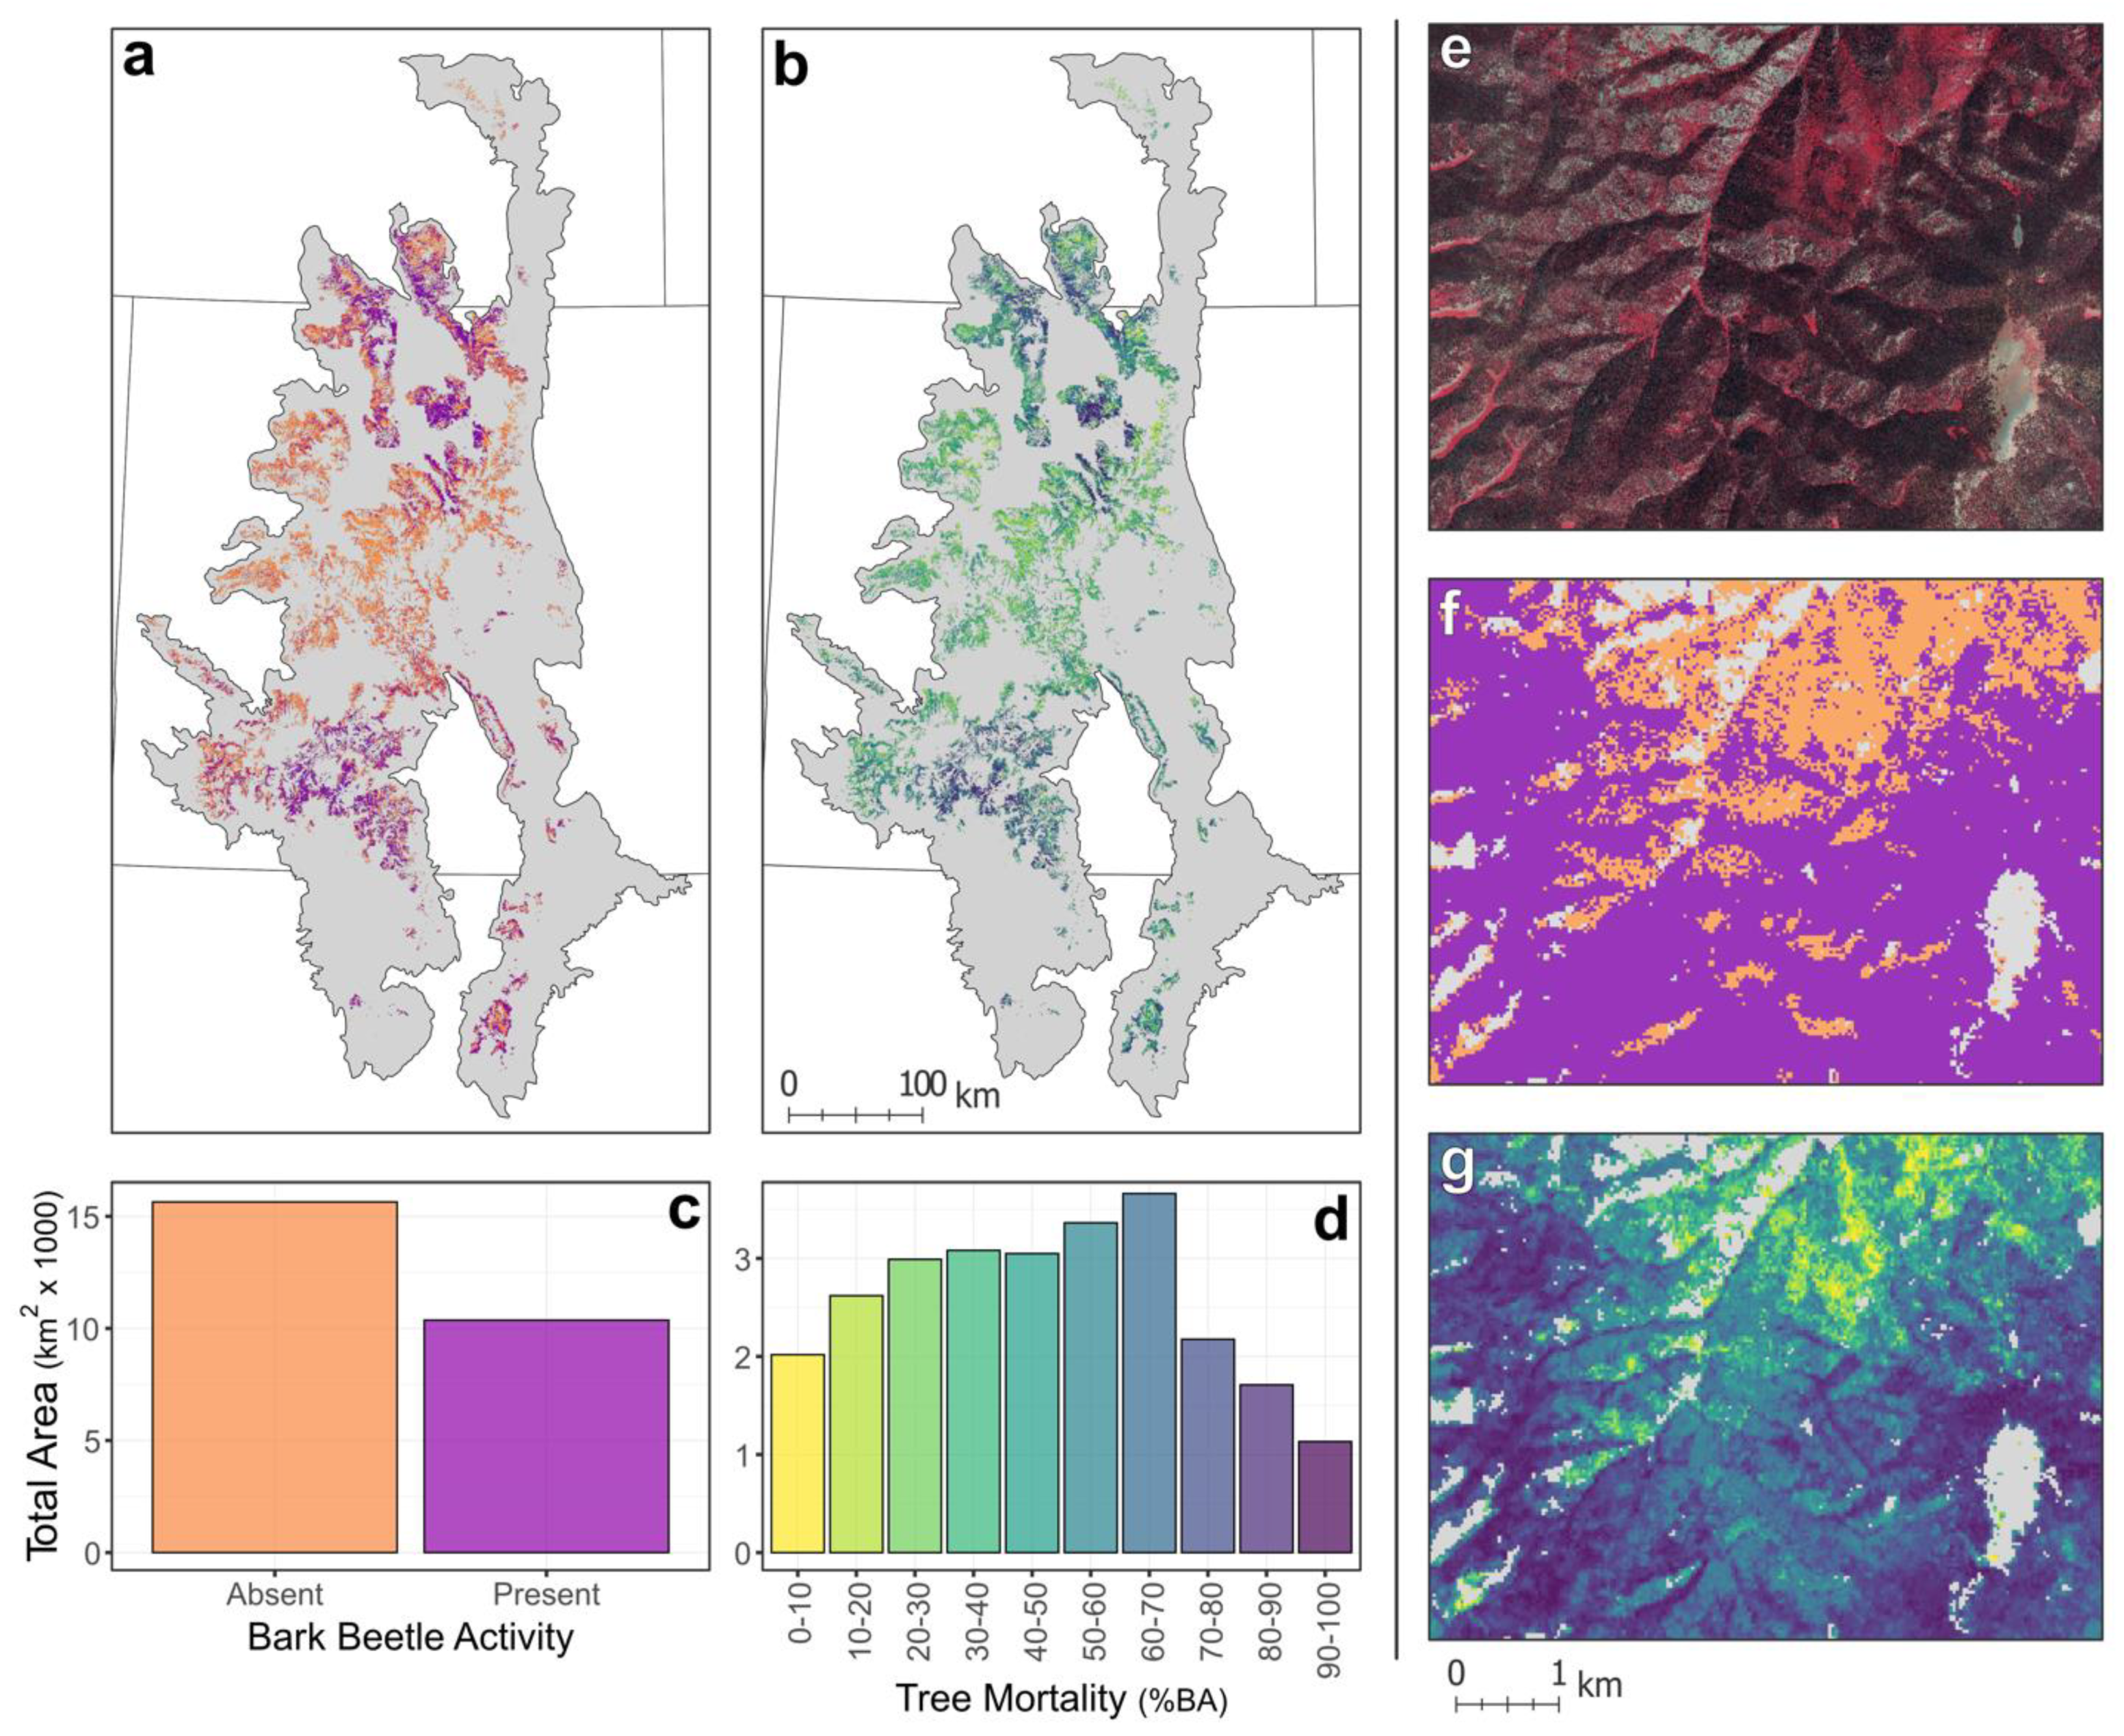 Remote Sensing | Free Full-Text | Effects of Bark Beetle Outbreaks on  Forest Landscape Pattern in the Southern Rocky Mountains, U.S.A. | HTML